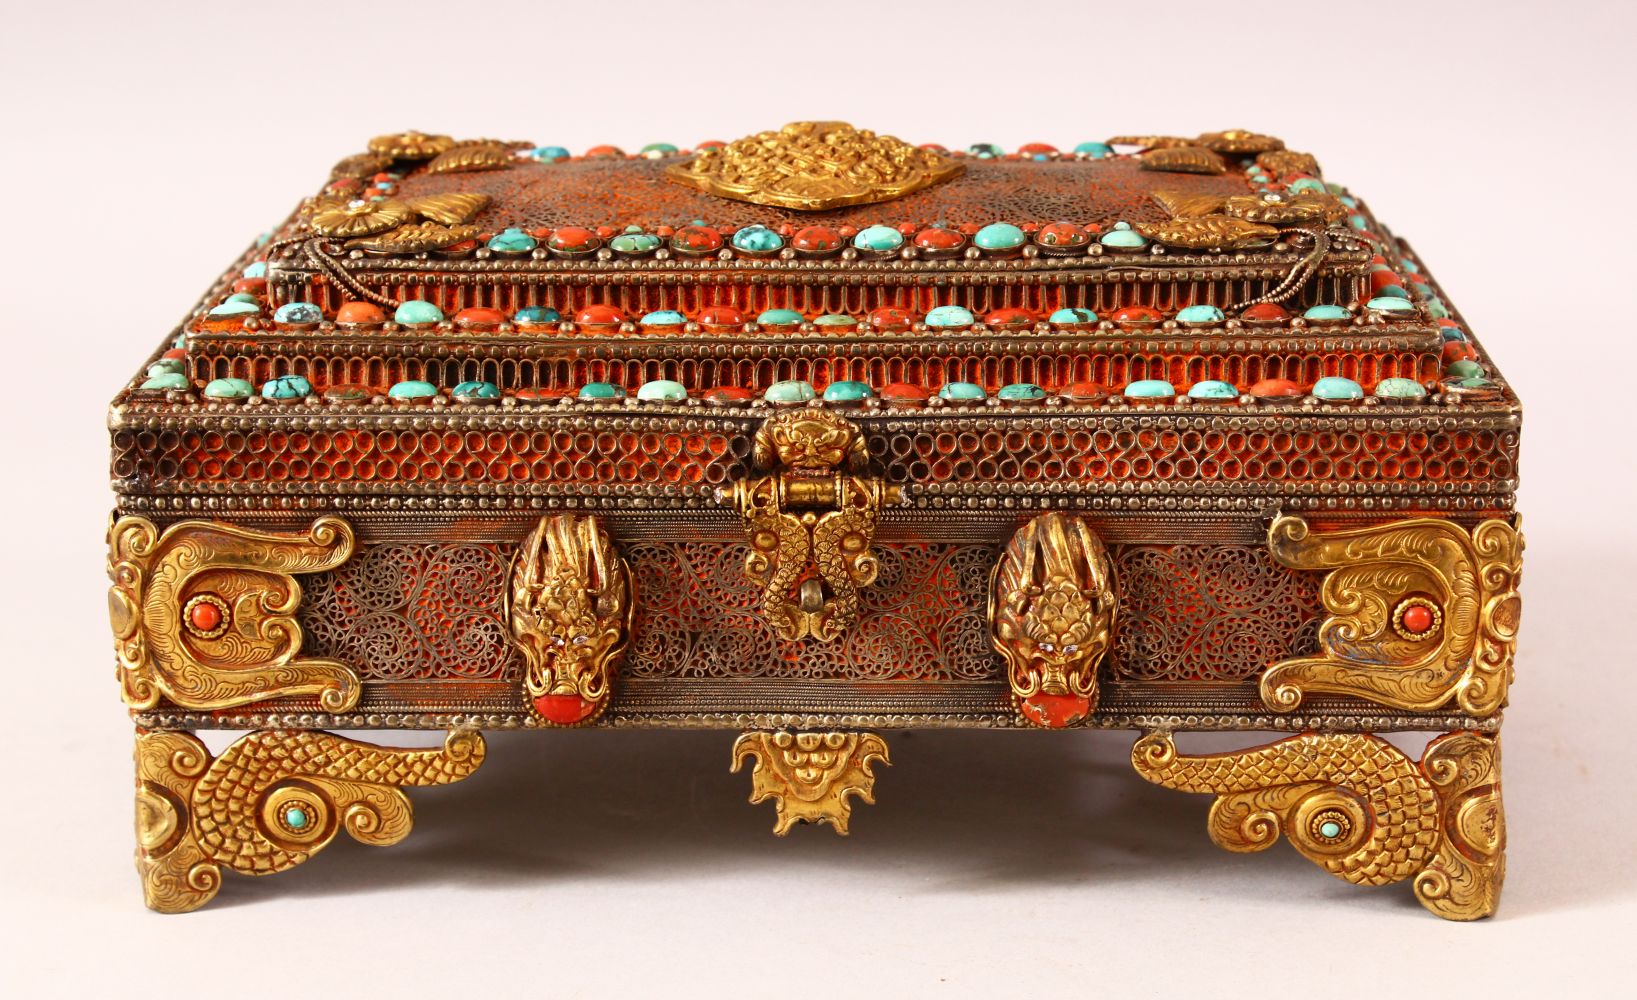 A TIBETAN MOUNTED AND INLAID METAL CASKET, the body with openwork style inlay, with gilt raised